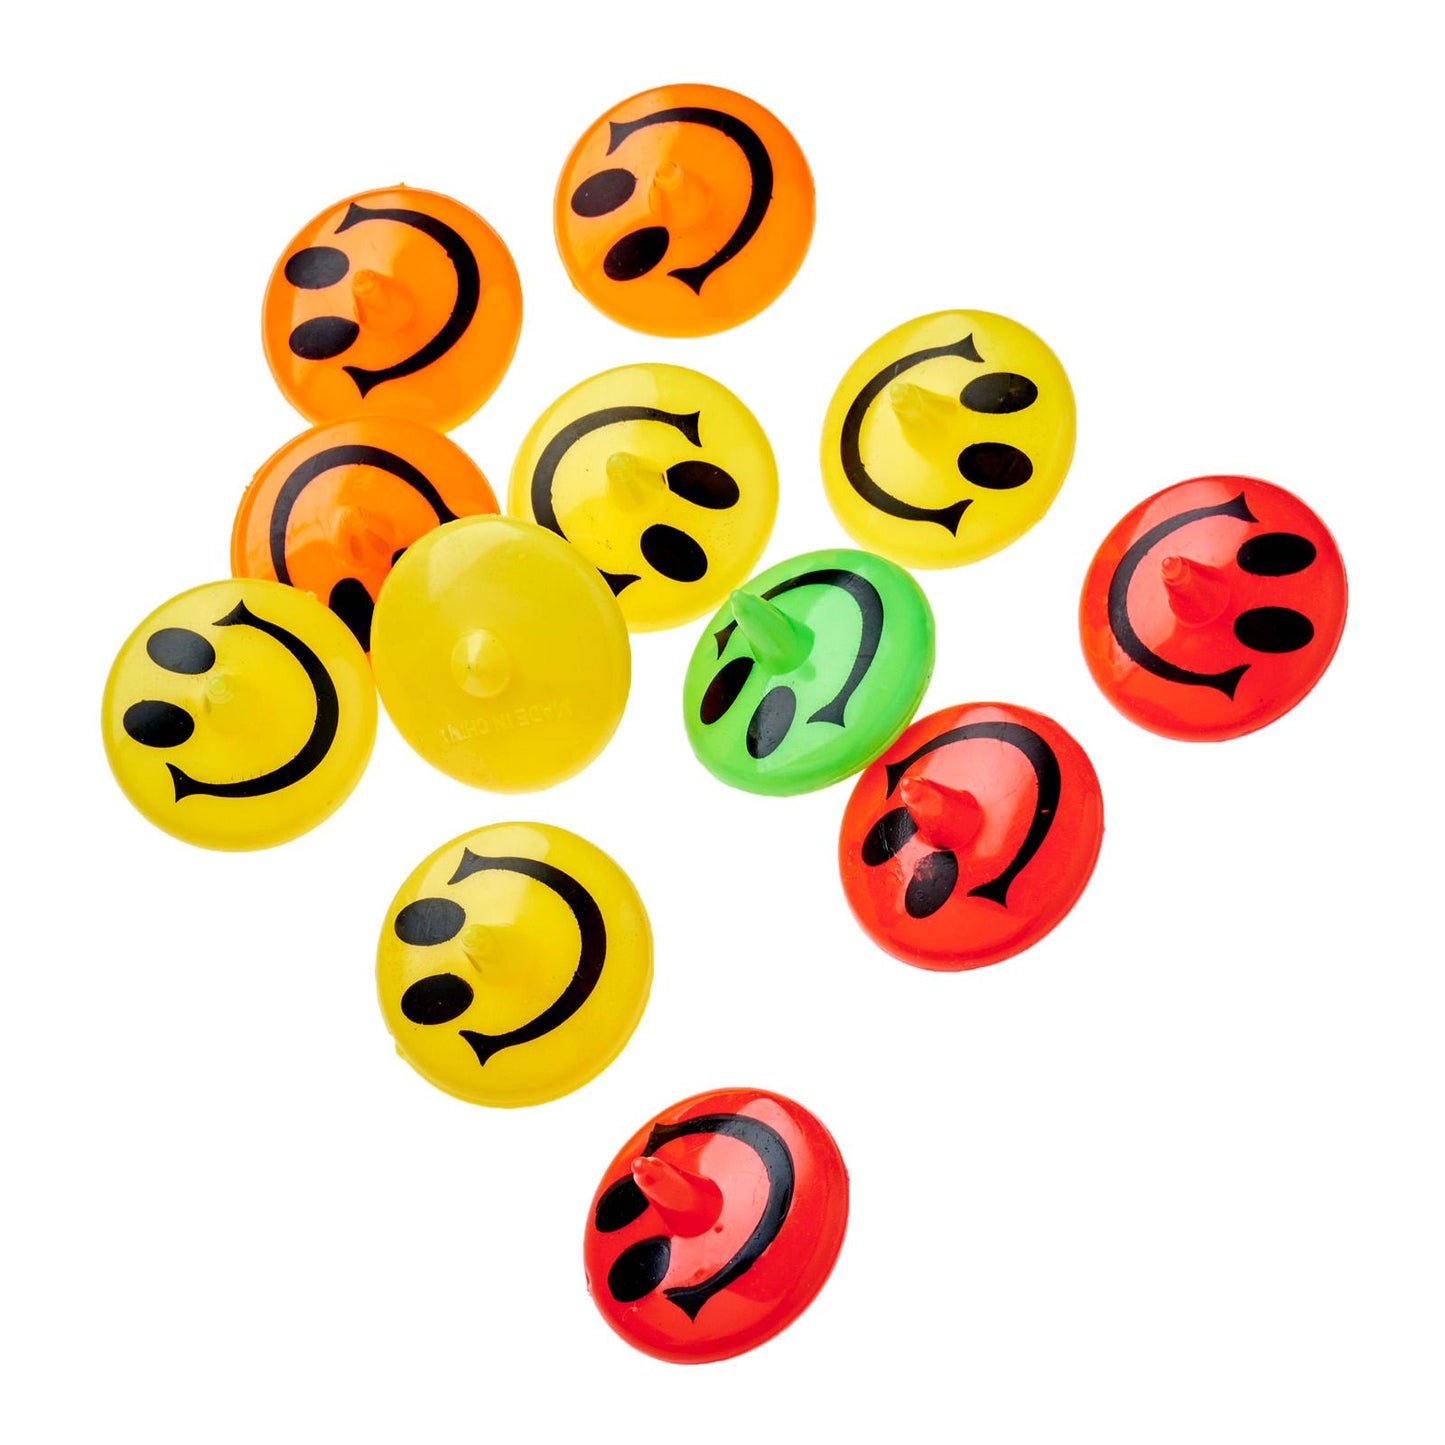 Mini Smiley Face Spinning Top